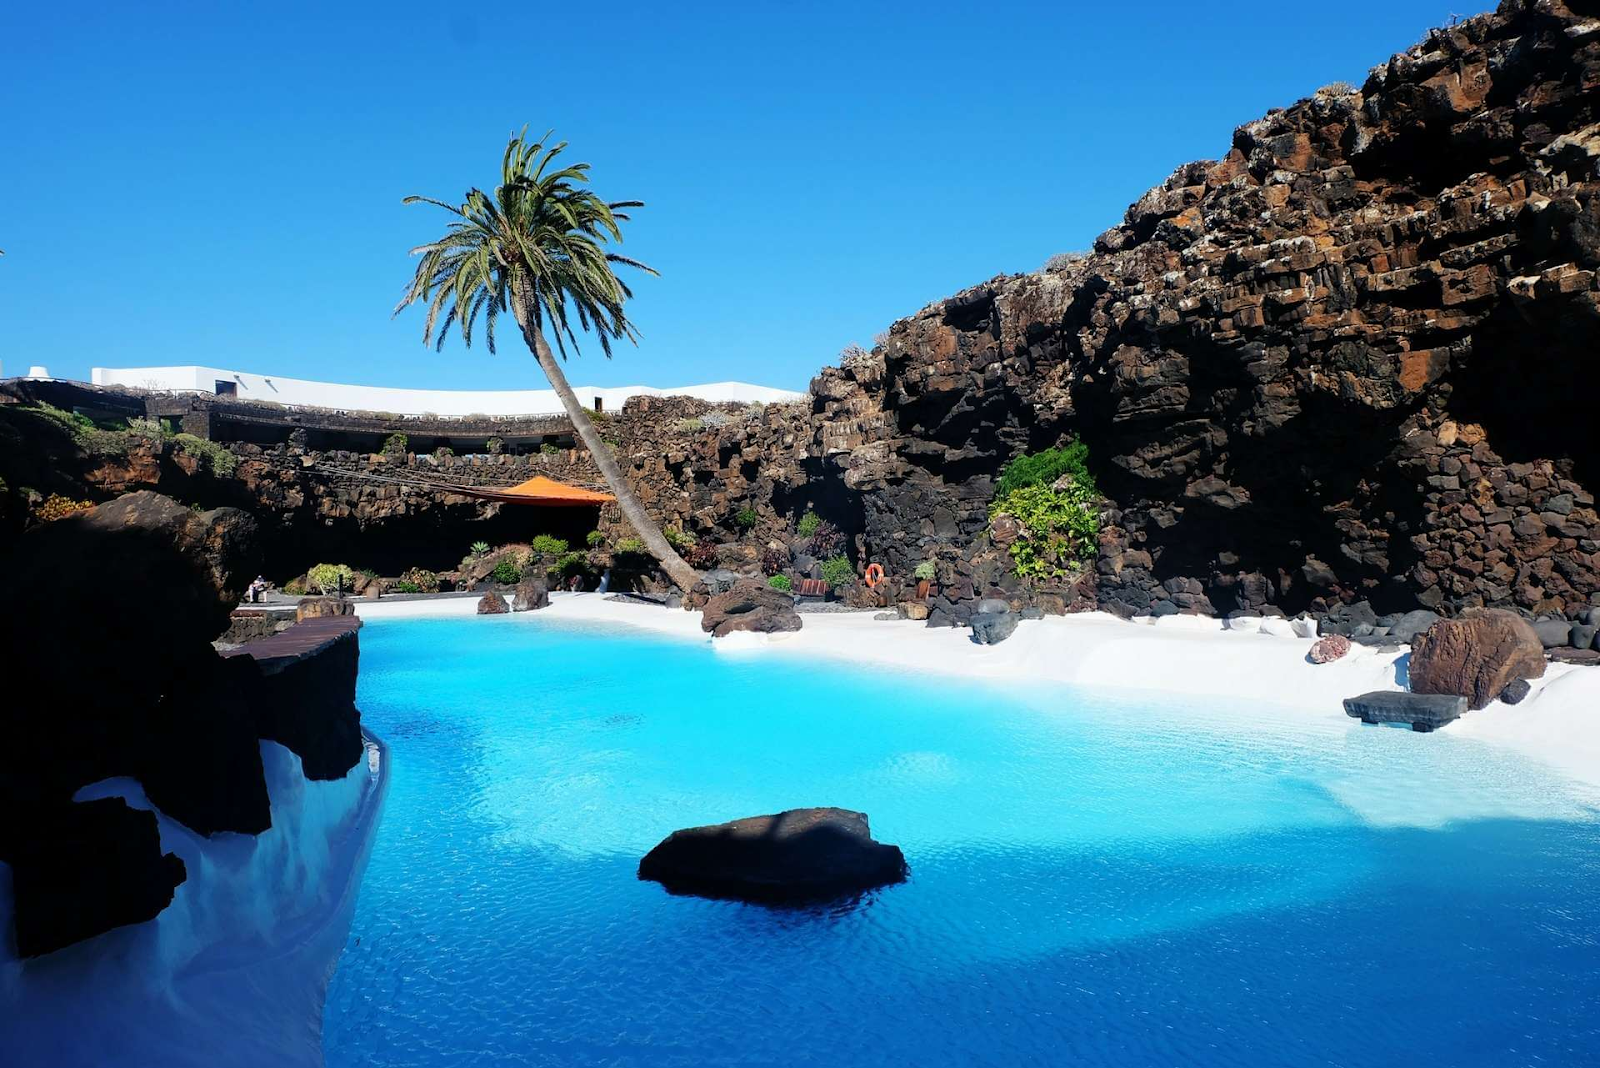 Plan an unforgettable Lanzarote holiday from Shannon or Dublin